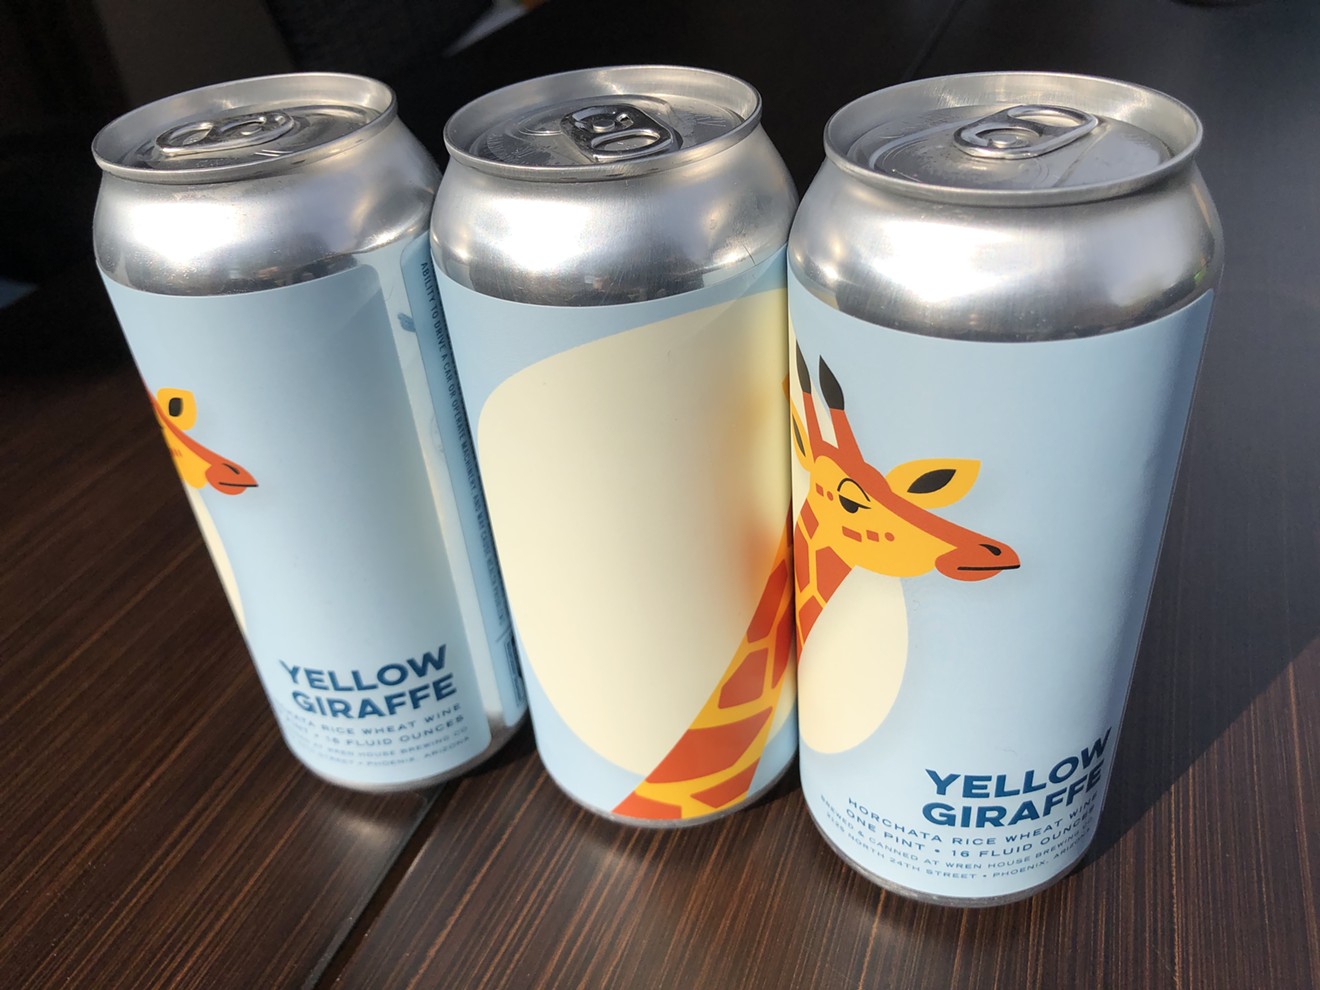 Yellow Giraffe is a wheat wine and a "horchata rice wheat wine."